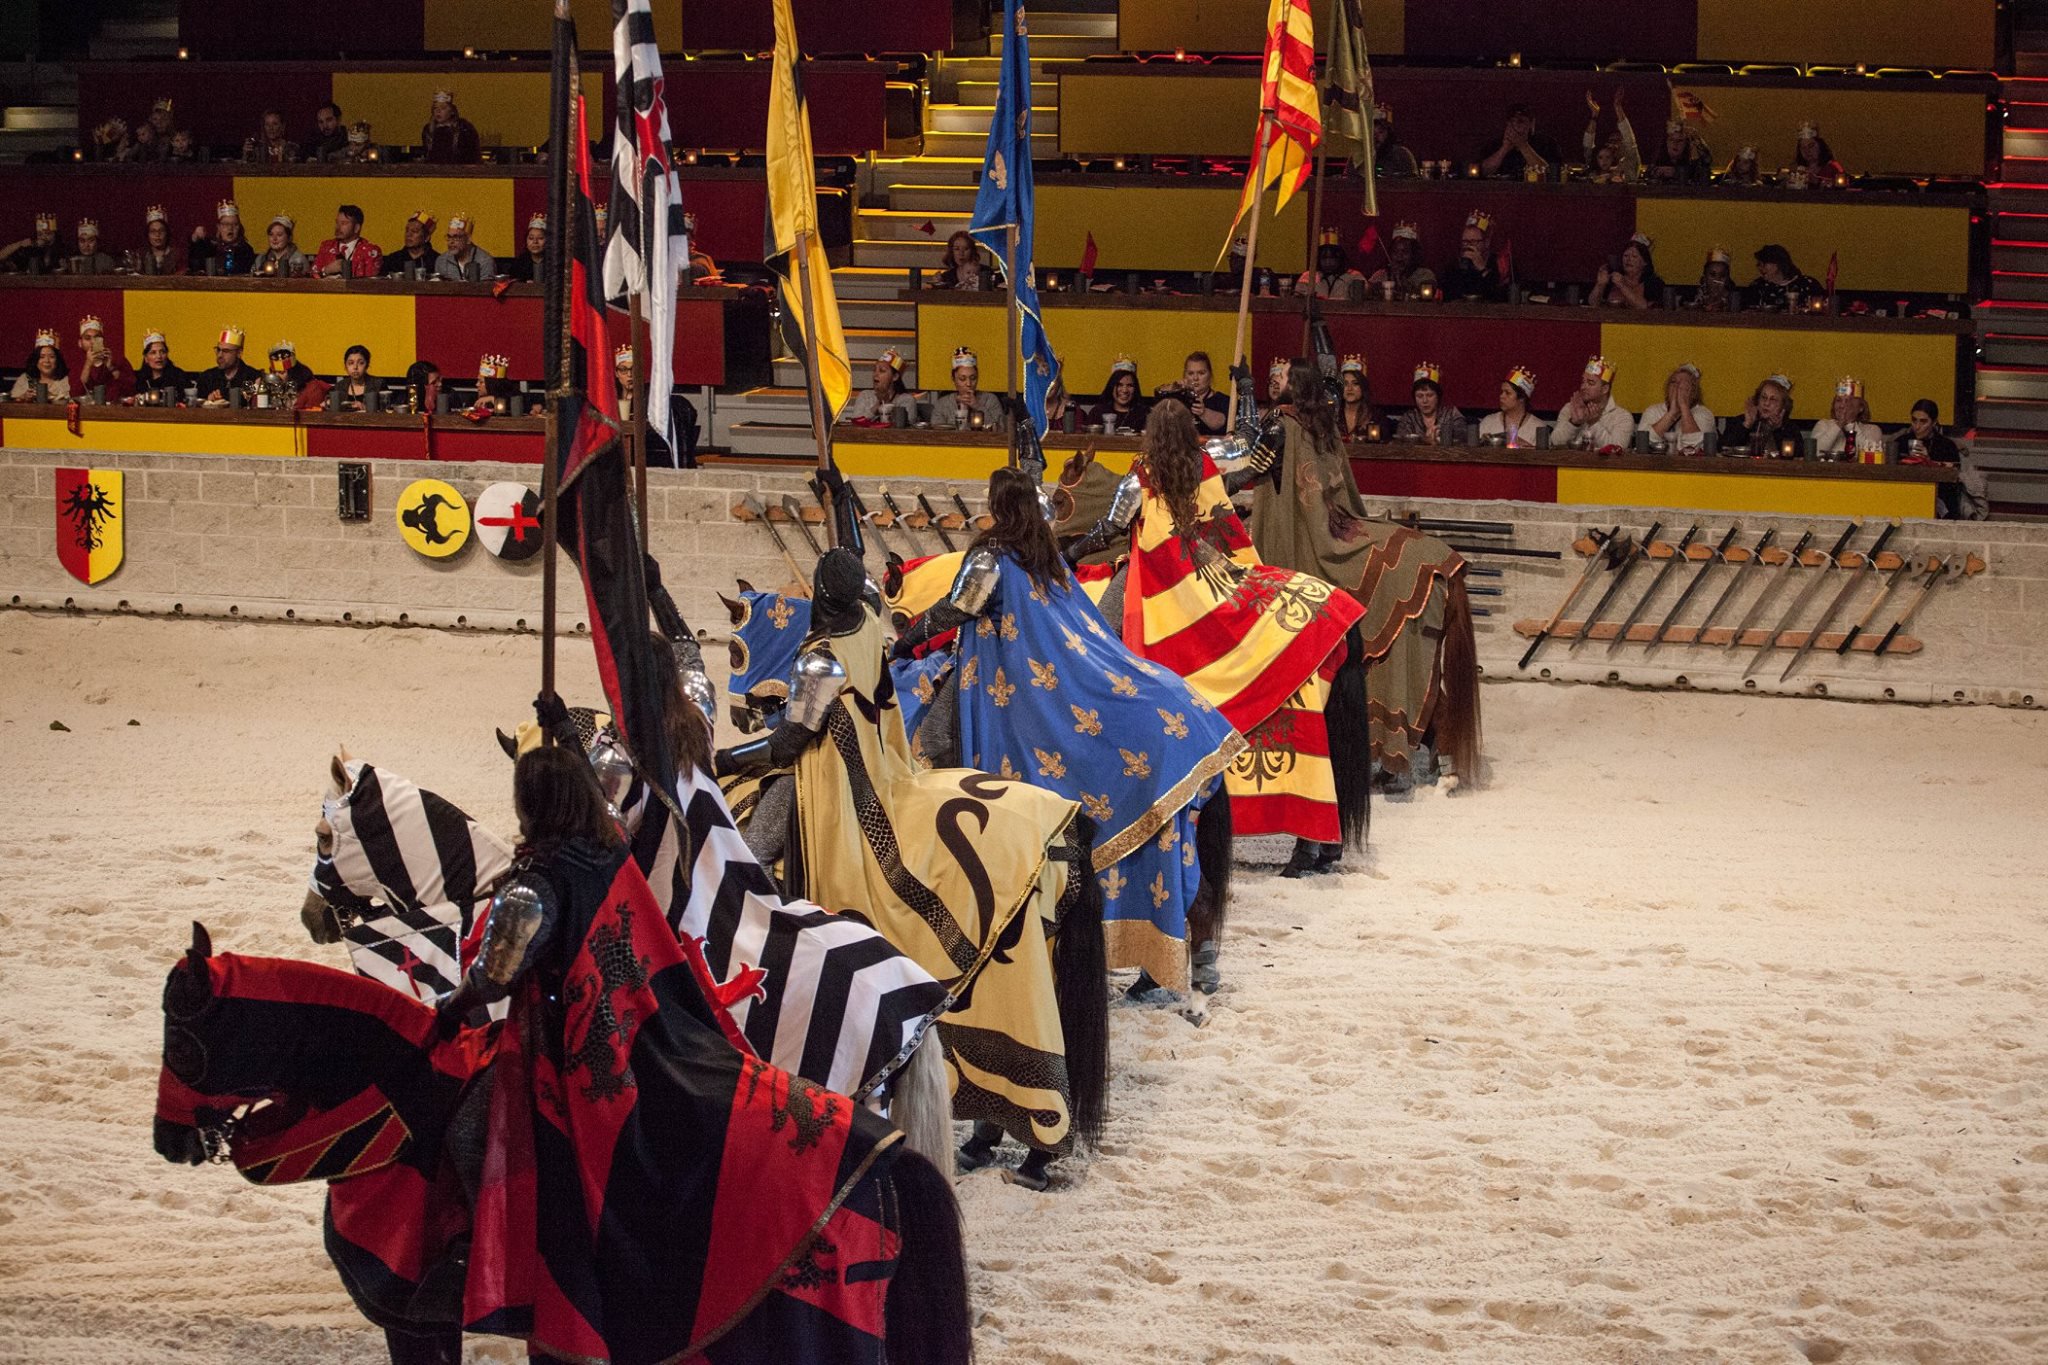 Medieval Times: Dinner & Jousting for the Whole Family in Buena